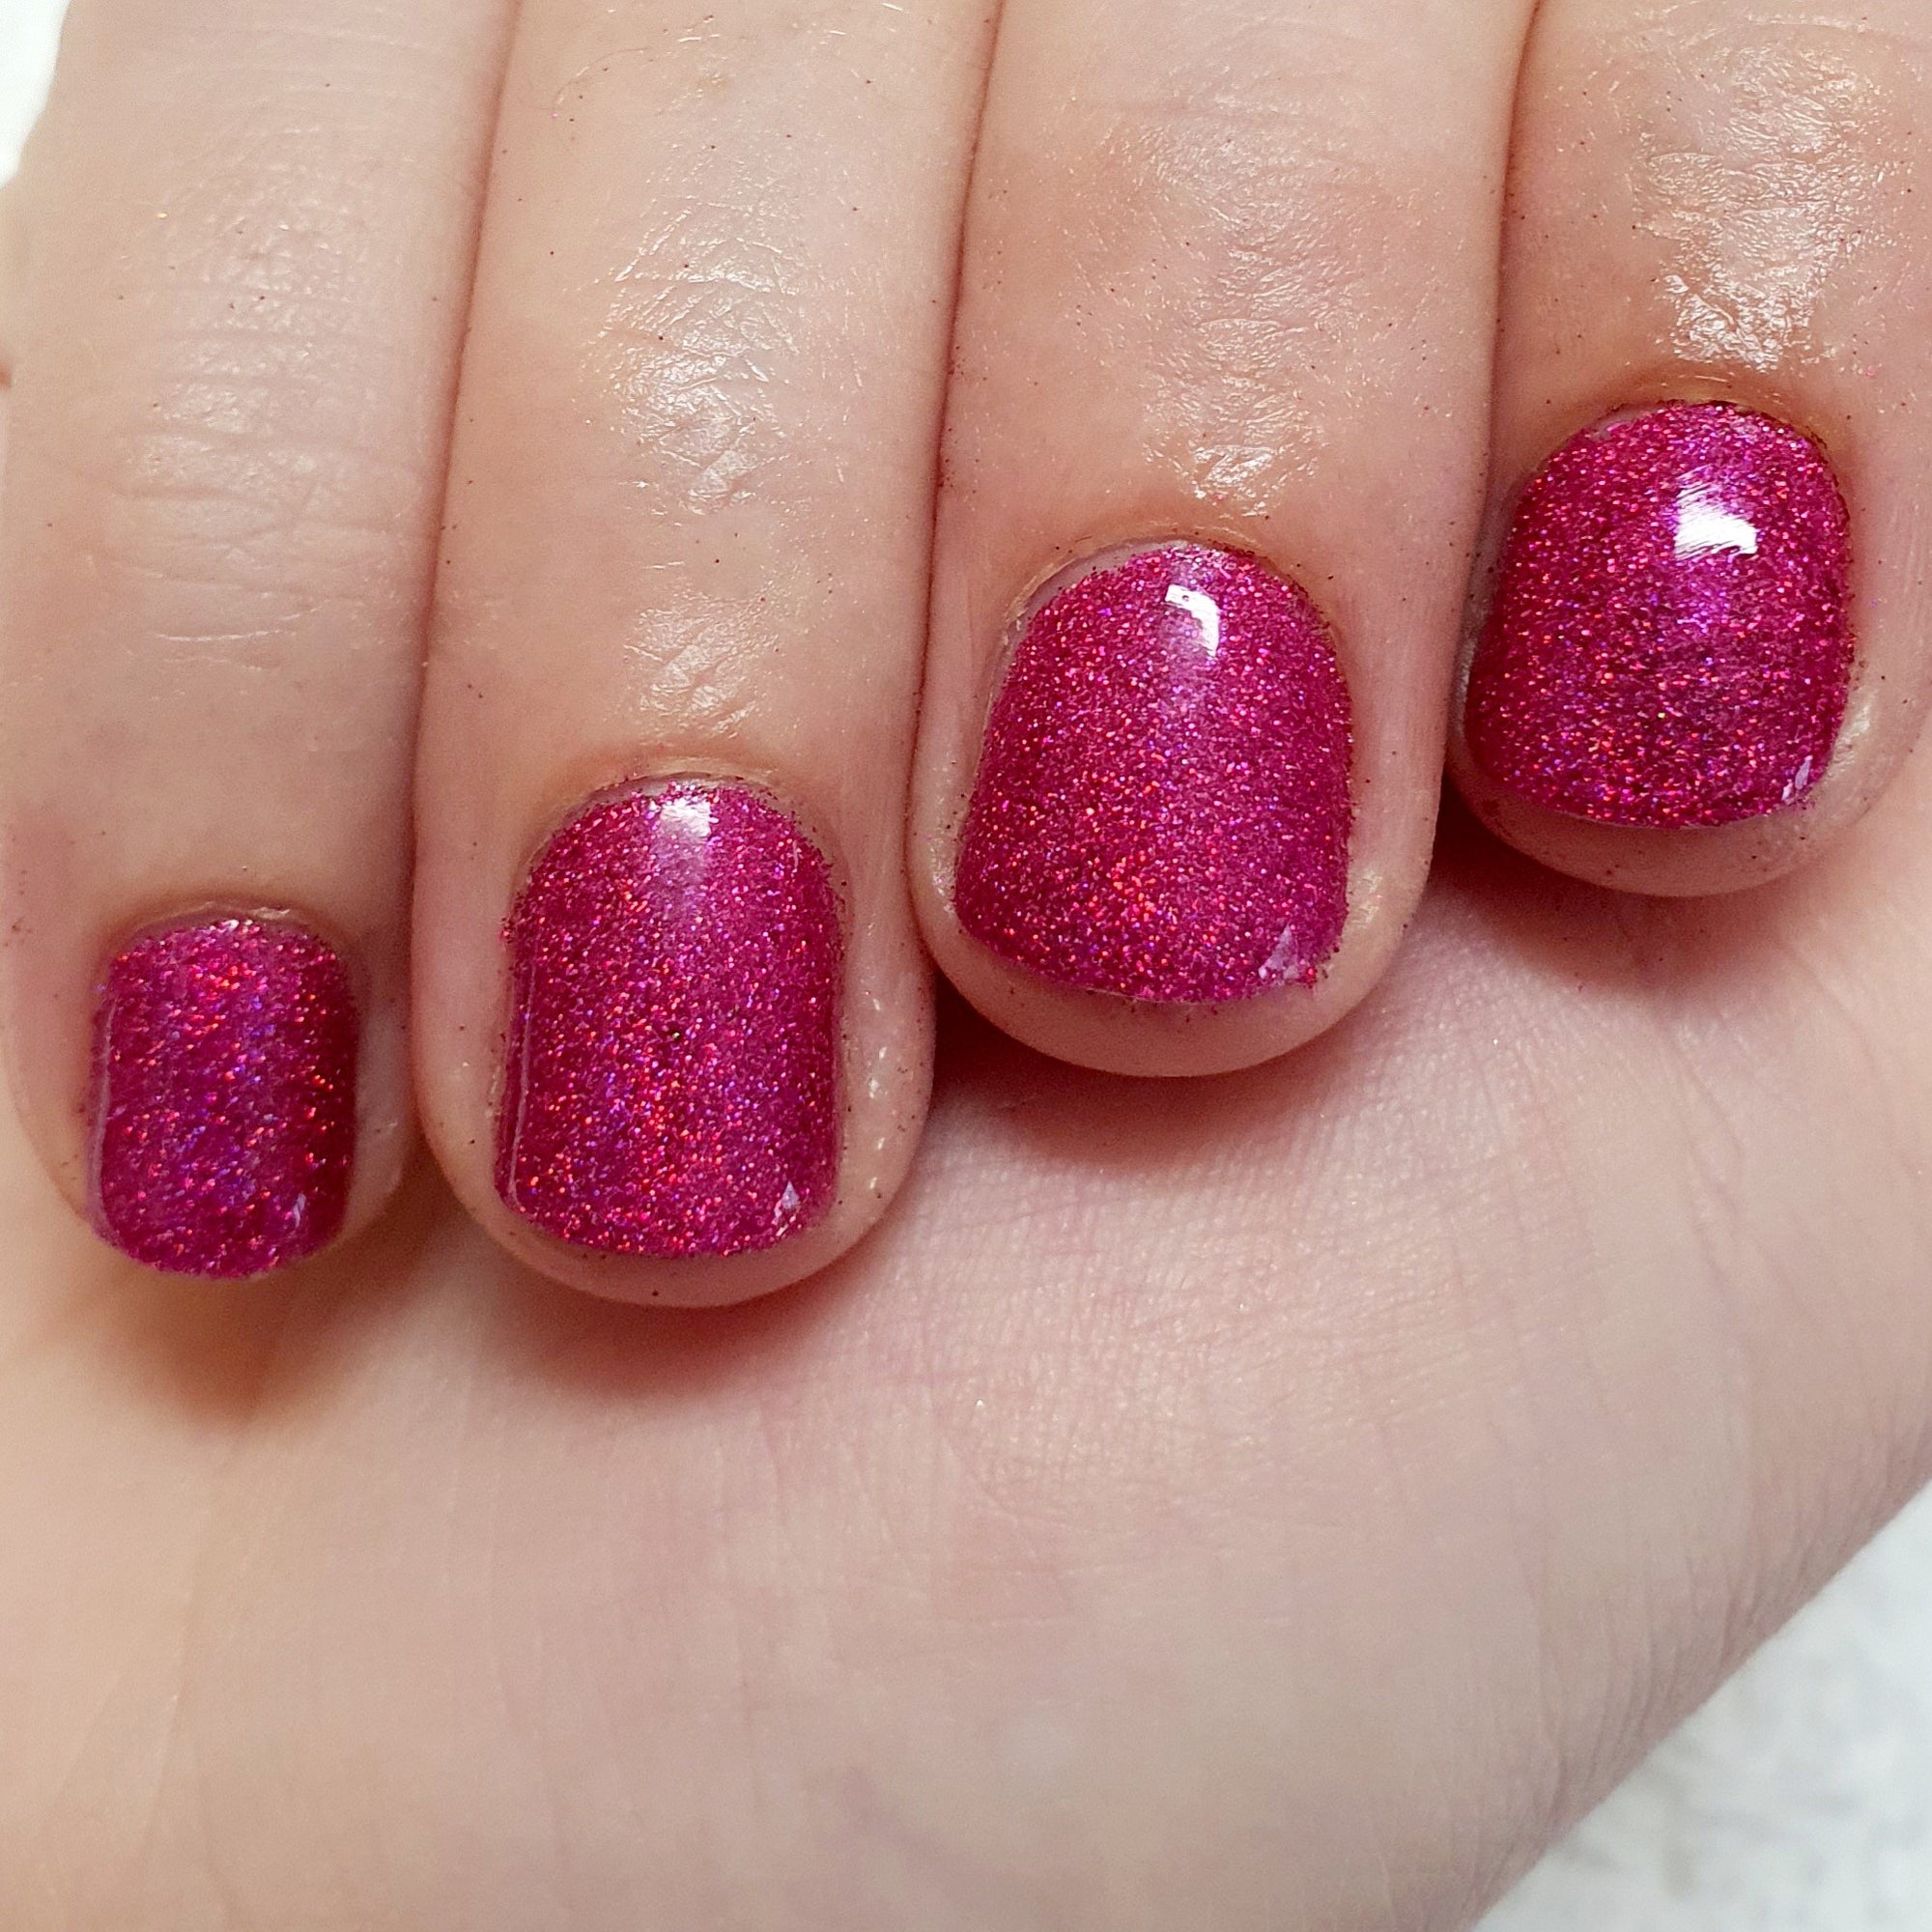 Hot pink holographic glitter manicure.